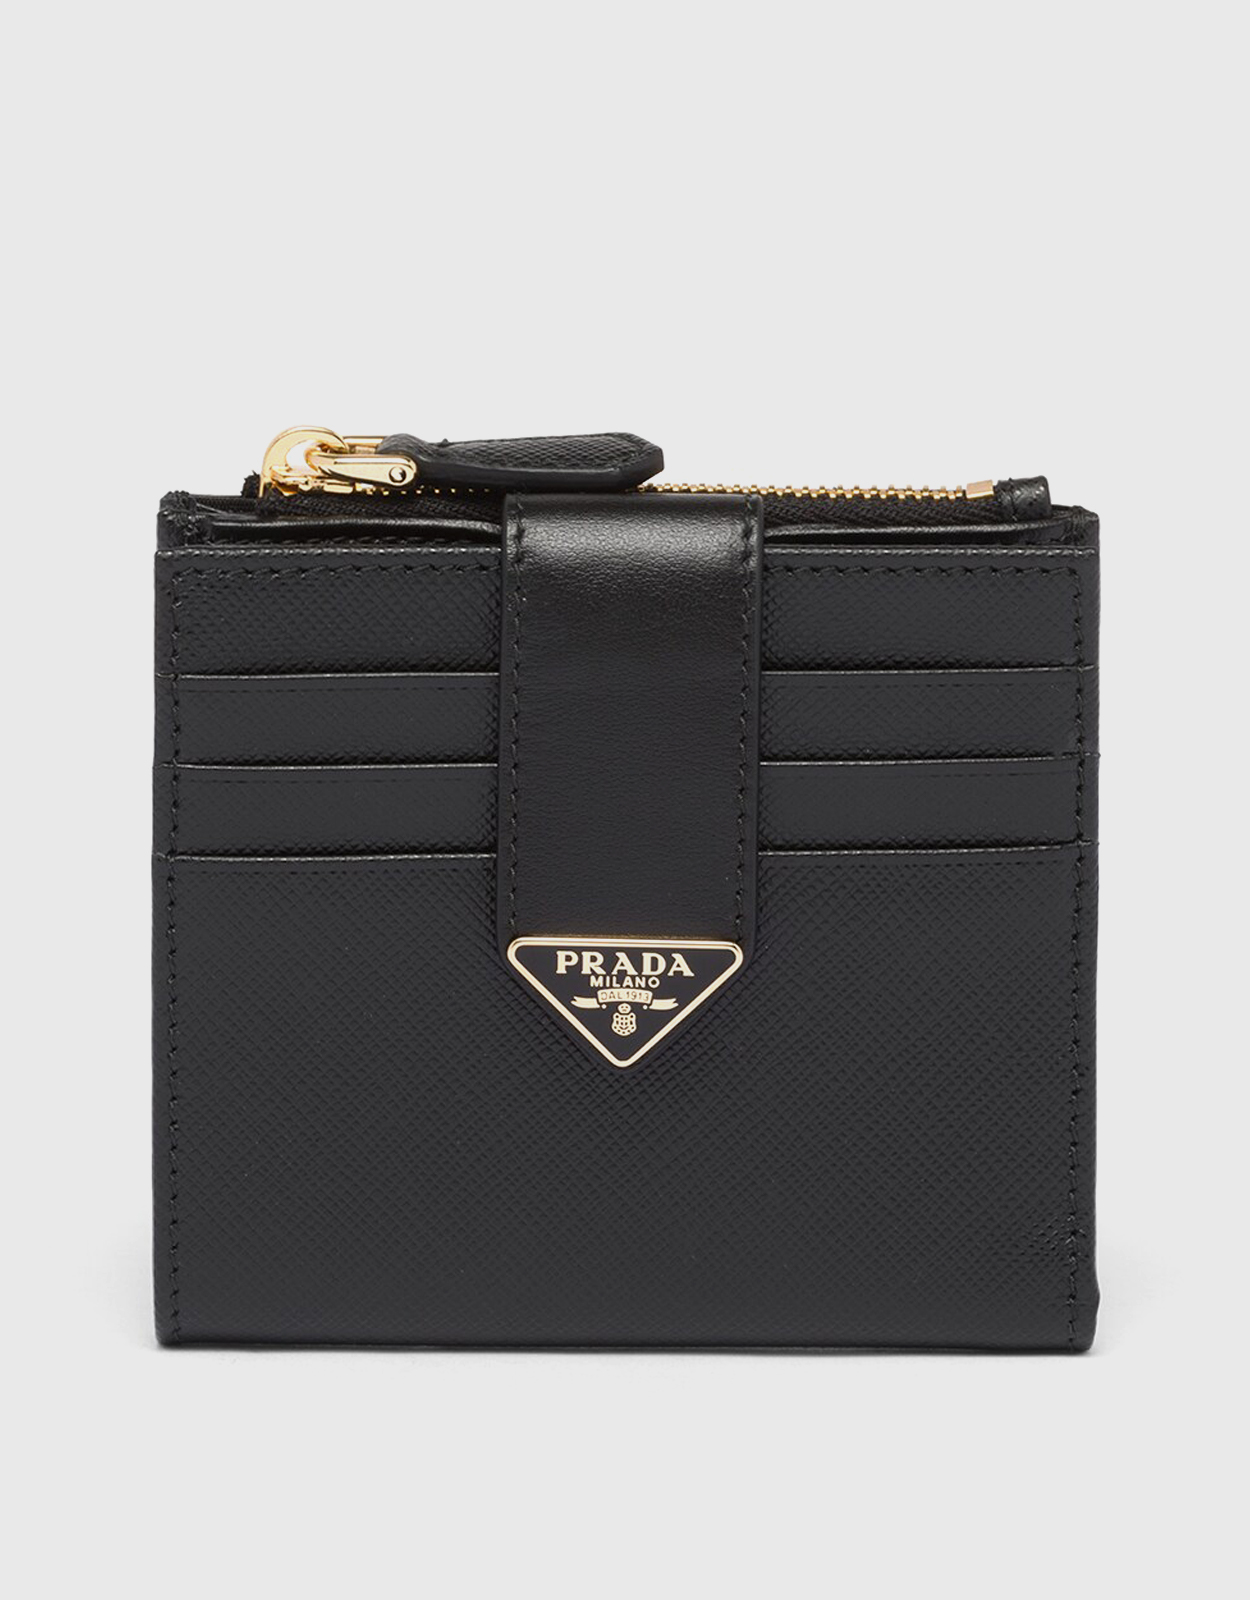 Prada Saffiano Small Leather Wallet (Wallets and Small Leather  Goods,Wallets) 